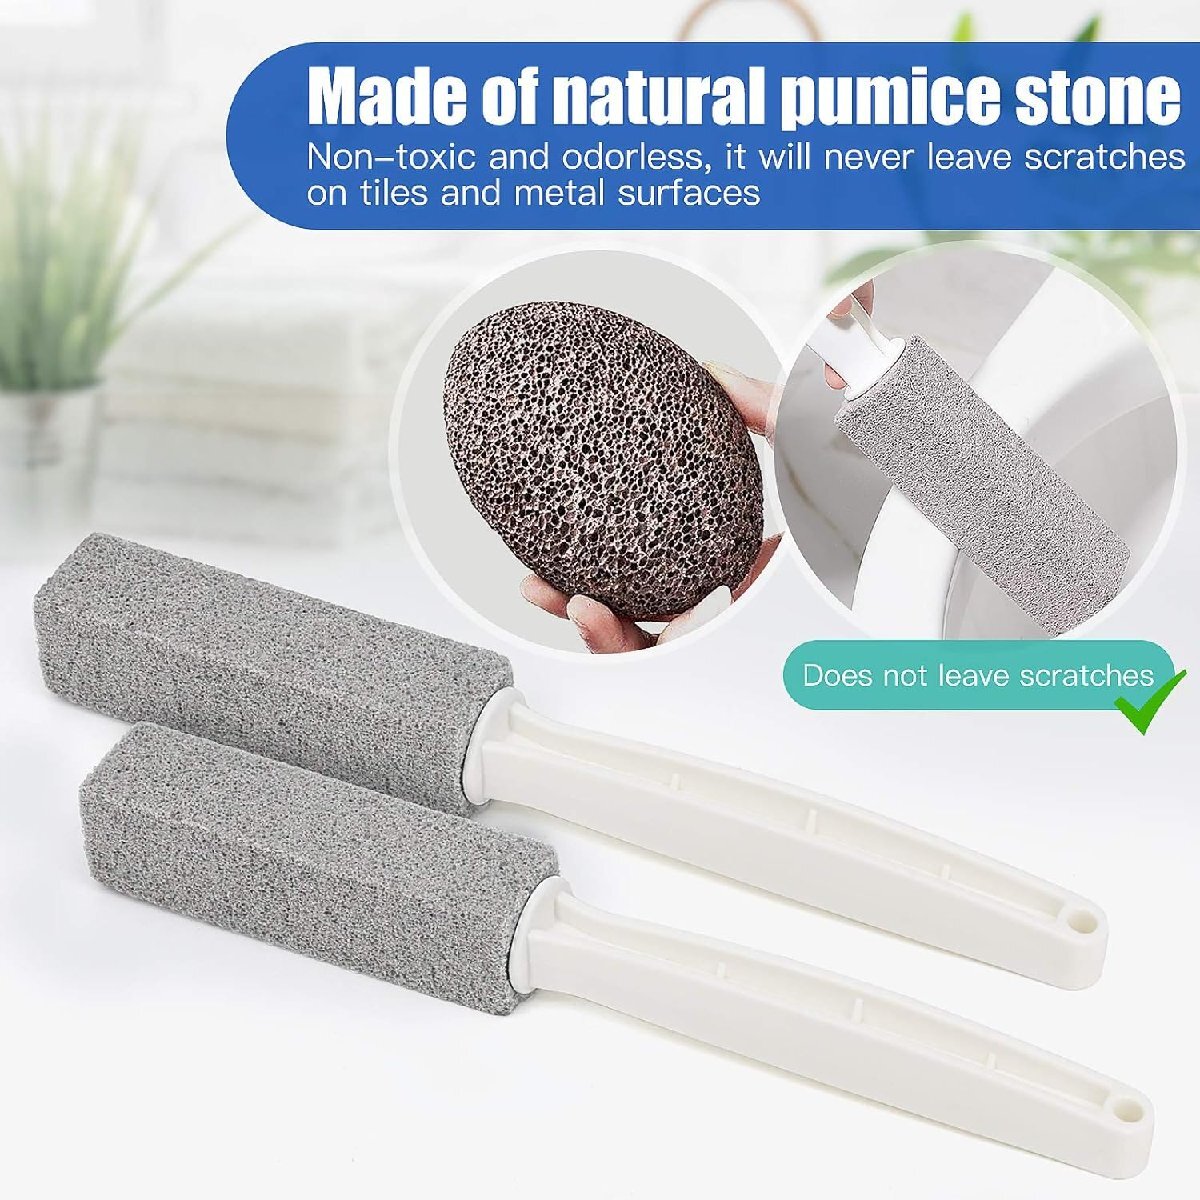  pumice brush toilet cleaner extra long steering wheel attaching 100% natural pumice toilet brush home use cleaning for . water cleaner remover toilet Pooh 